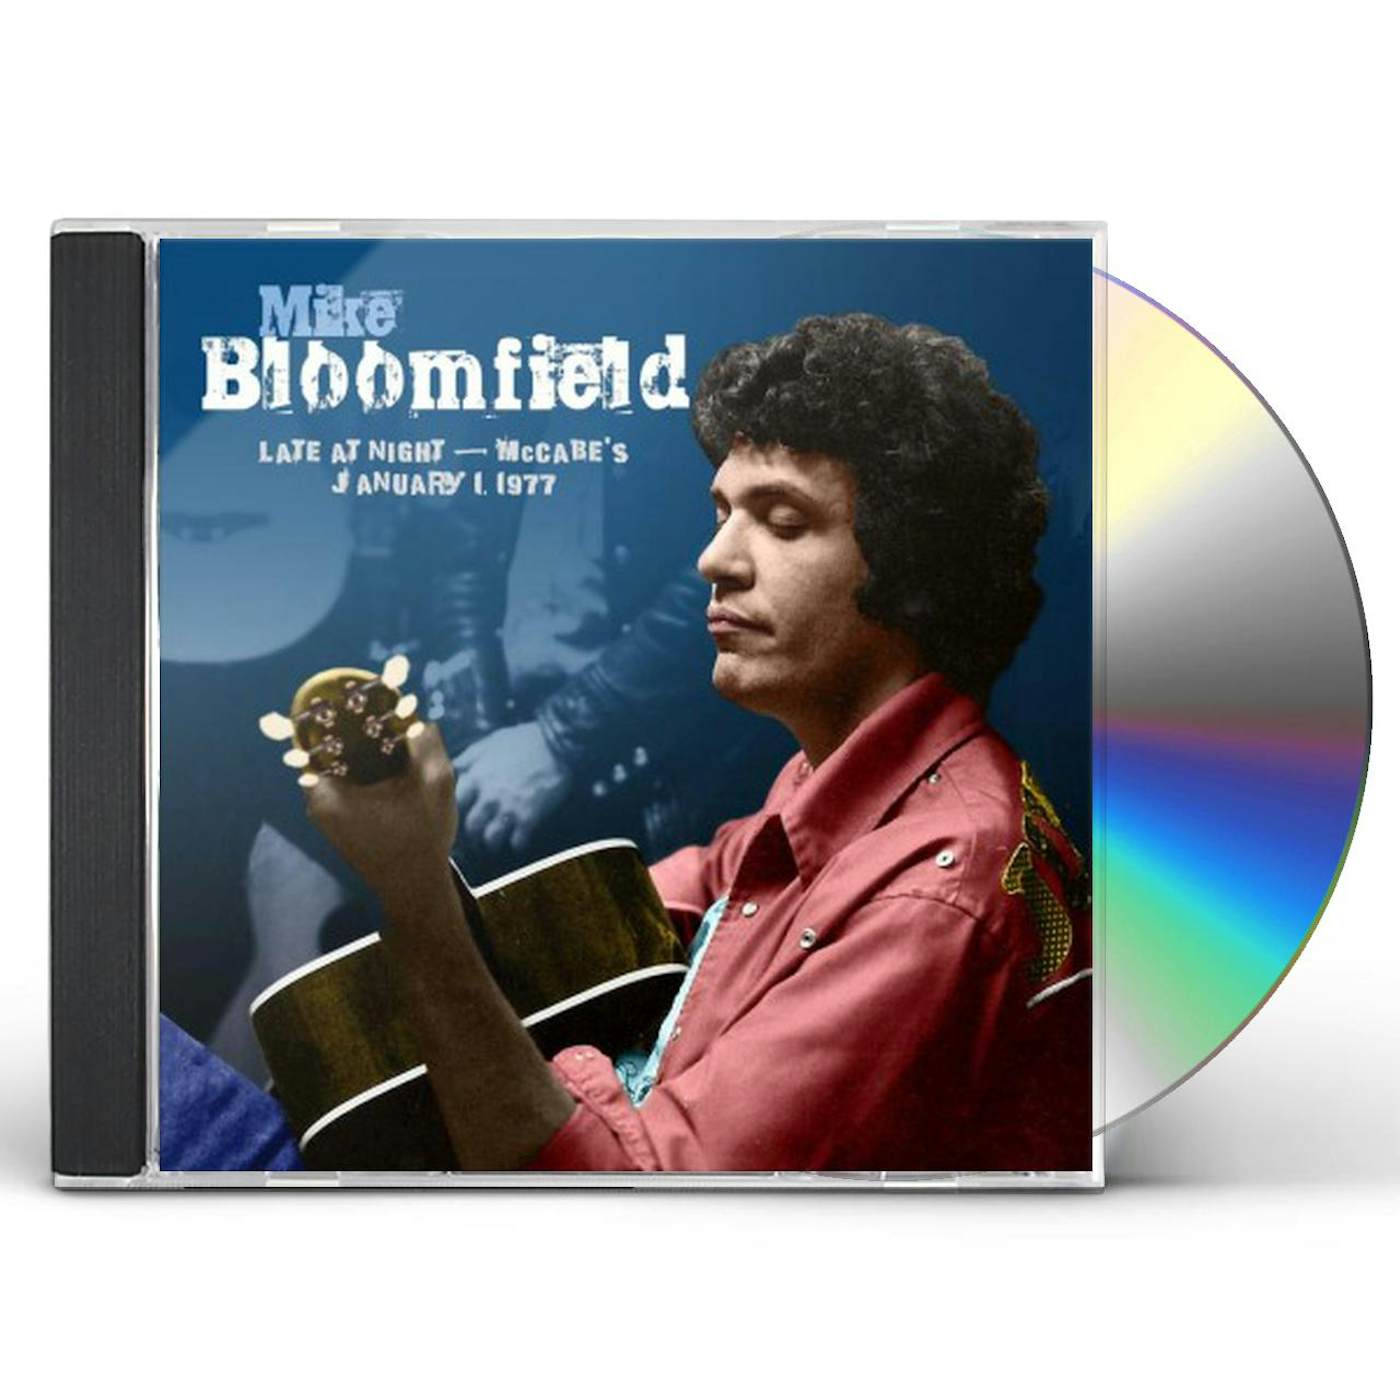 Mike Bloomfield LATE AT NIGHT: MCCABES JANUARY 1,1977 CD